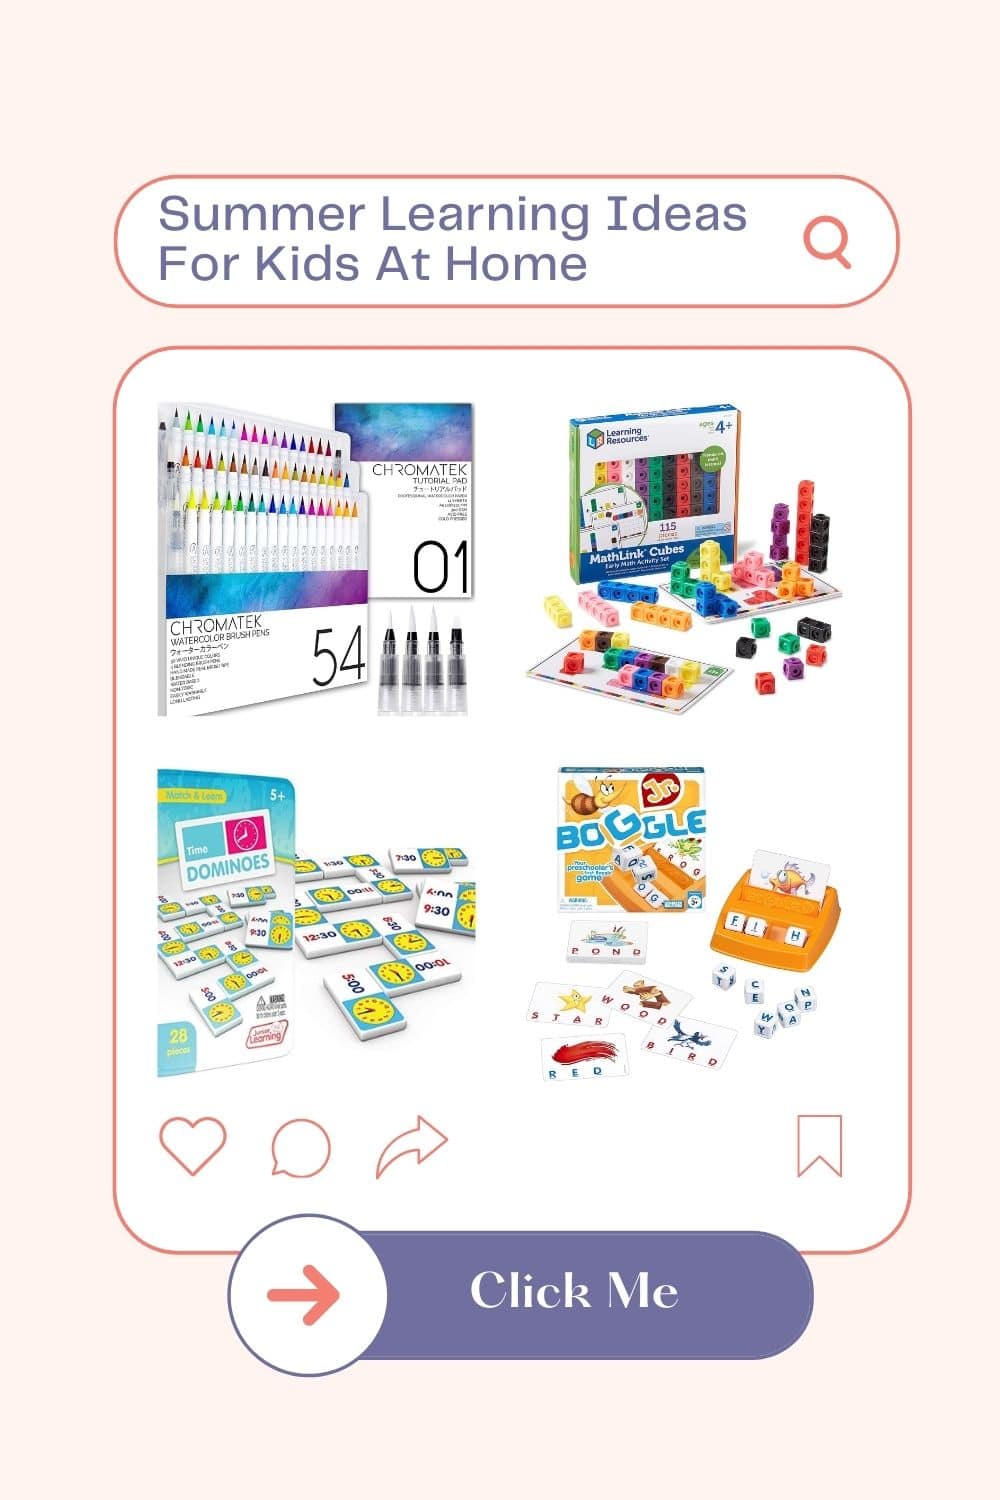 Summer Learning Ideas For Kids At Home